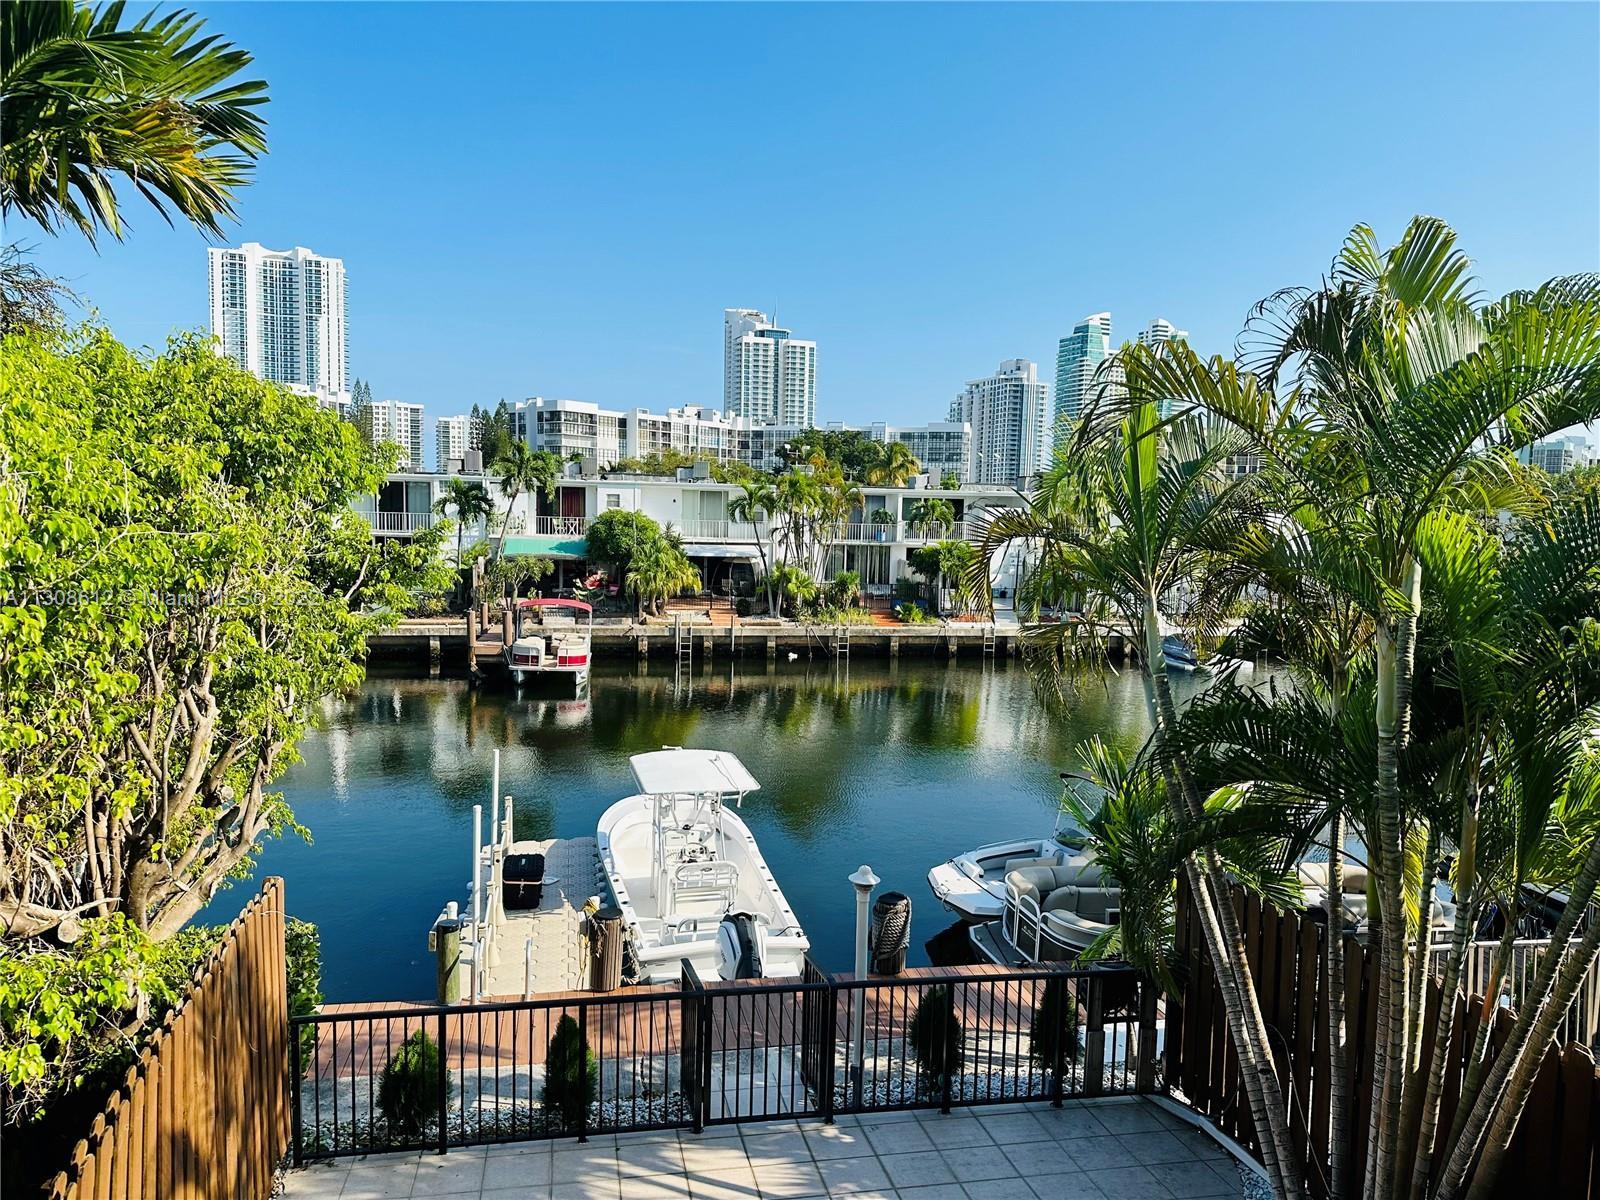 Rare find in the heart of Hallandale Beach.  Whether you are a boater or want to relax on a private 